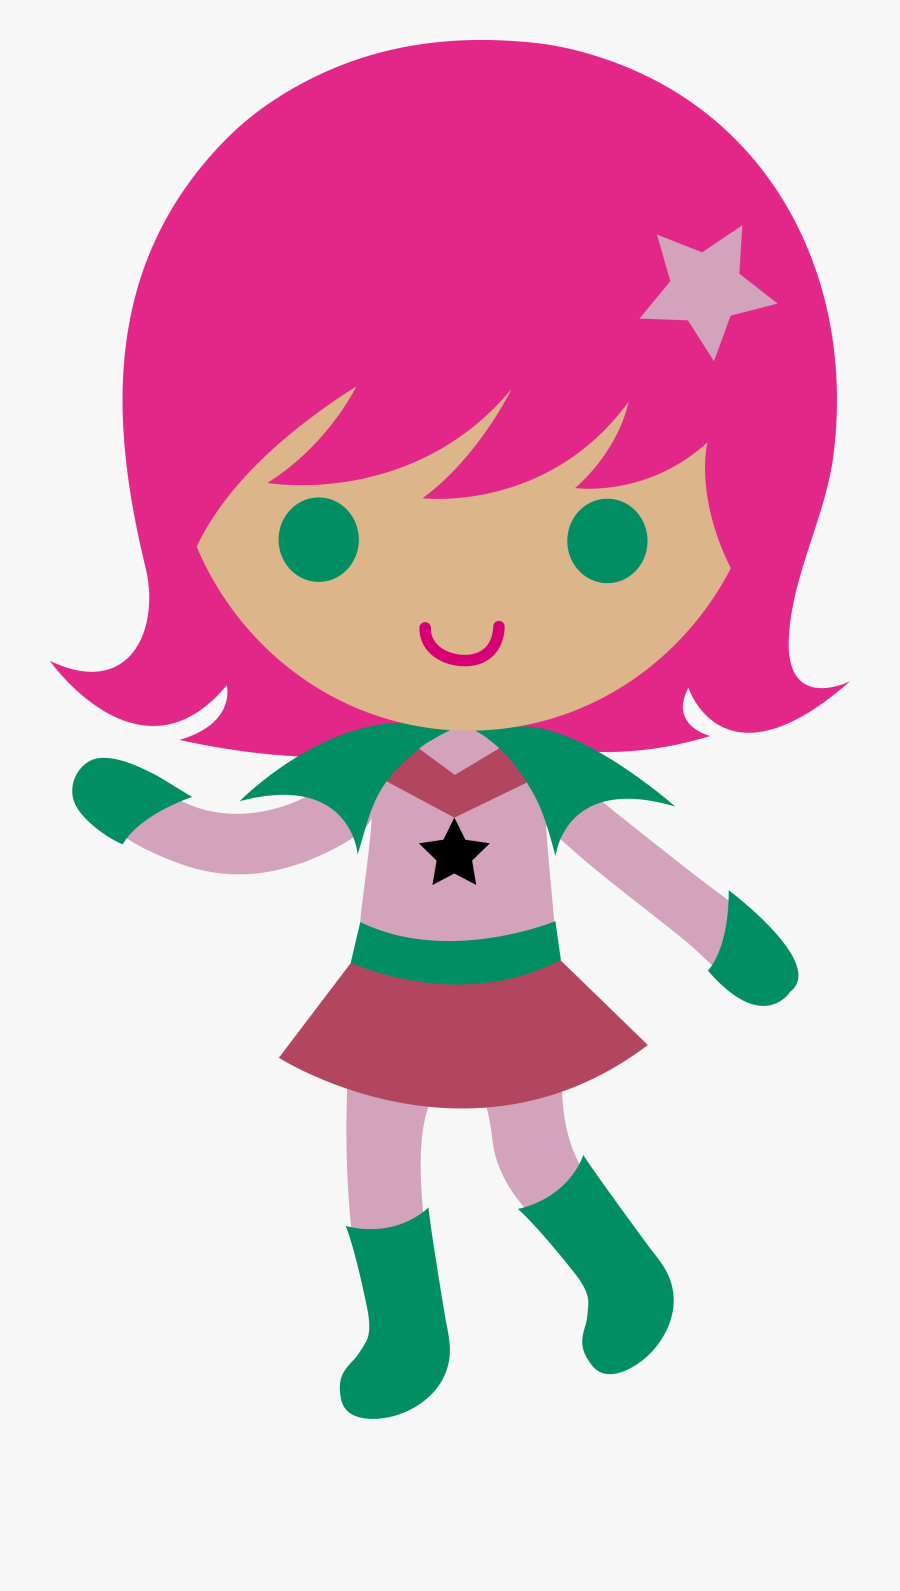 Space Cadet Girl With Pink Hair - Girl With Pink Hair Clipart, Transparent Clipart